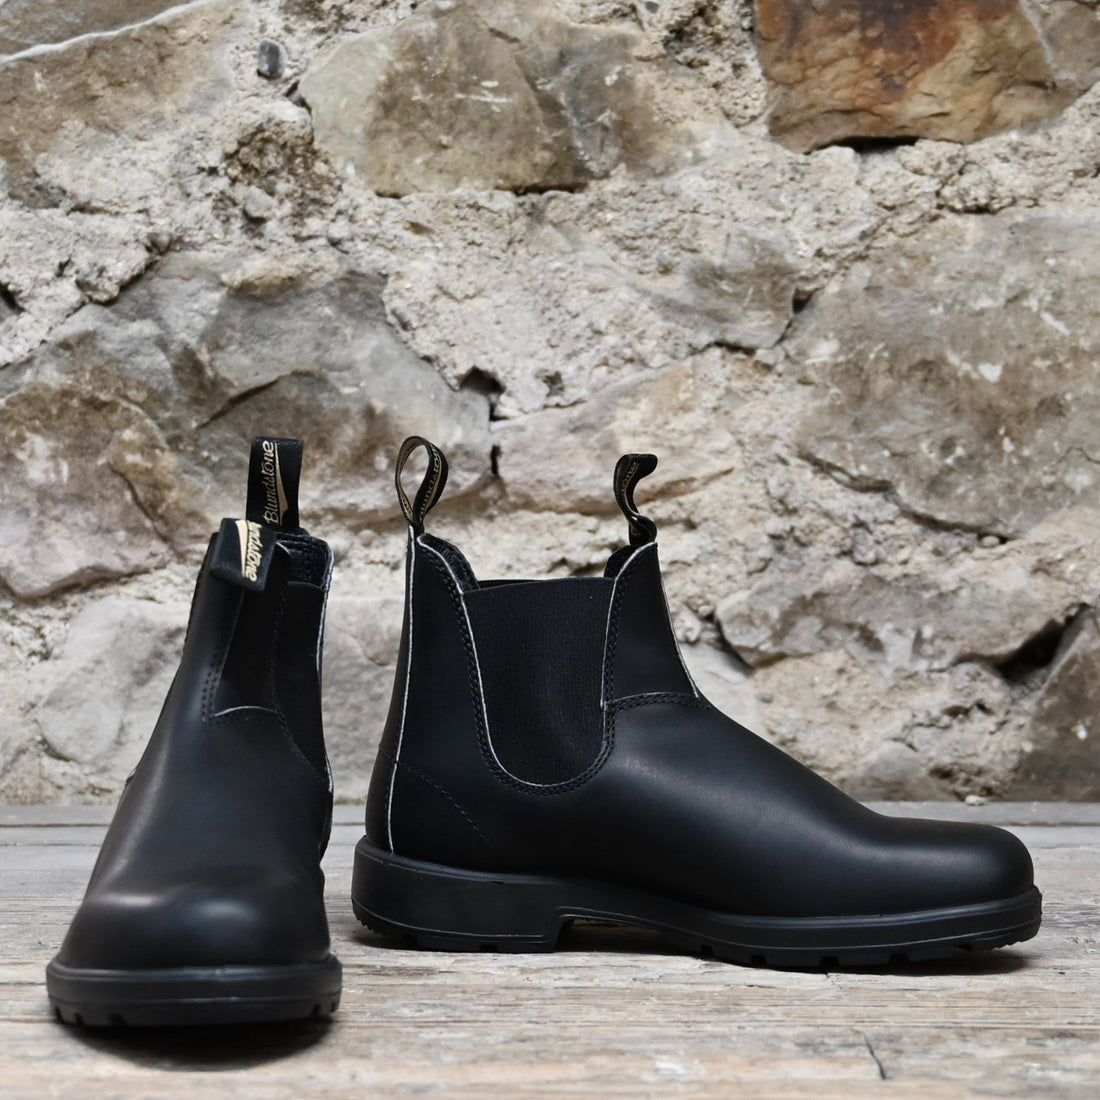 Blundstone Slip On In Premium Black Leather view of front and side